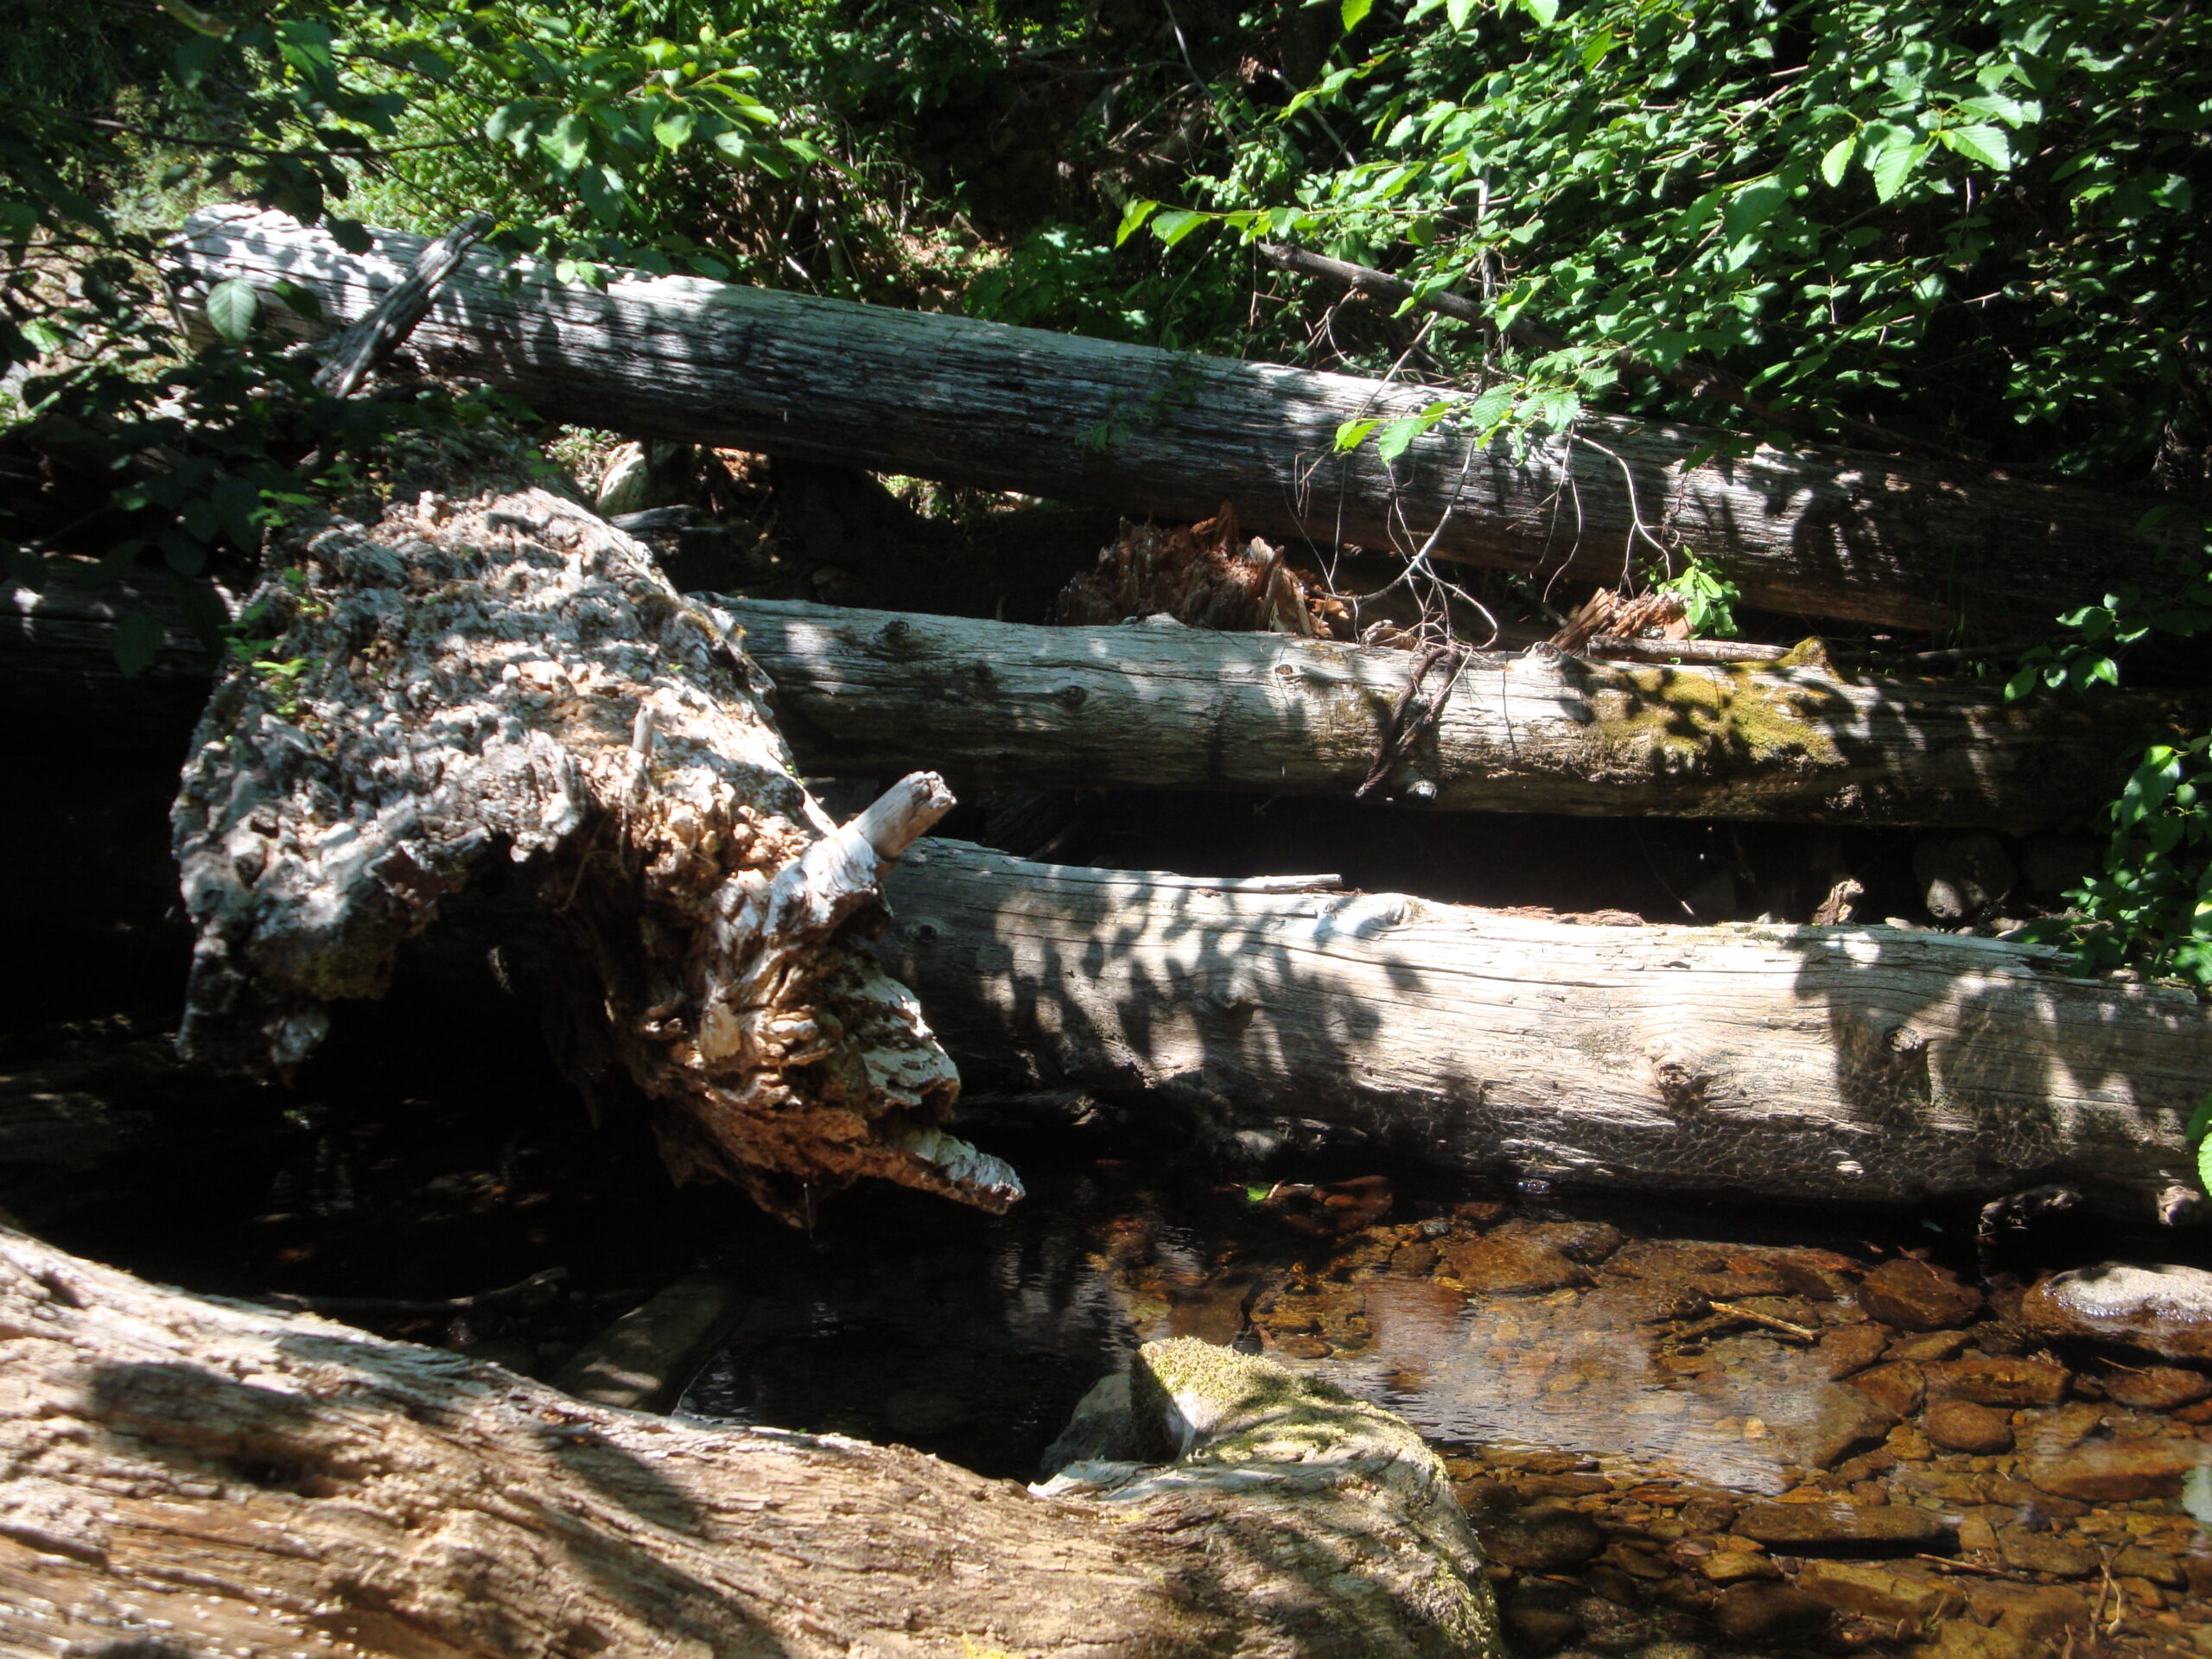 This is a picture of a small woody debris jam on a small creek within the Lake Branch Timber Sale. There are strong shadows casted on the old logs lying across the creek.